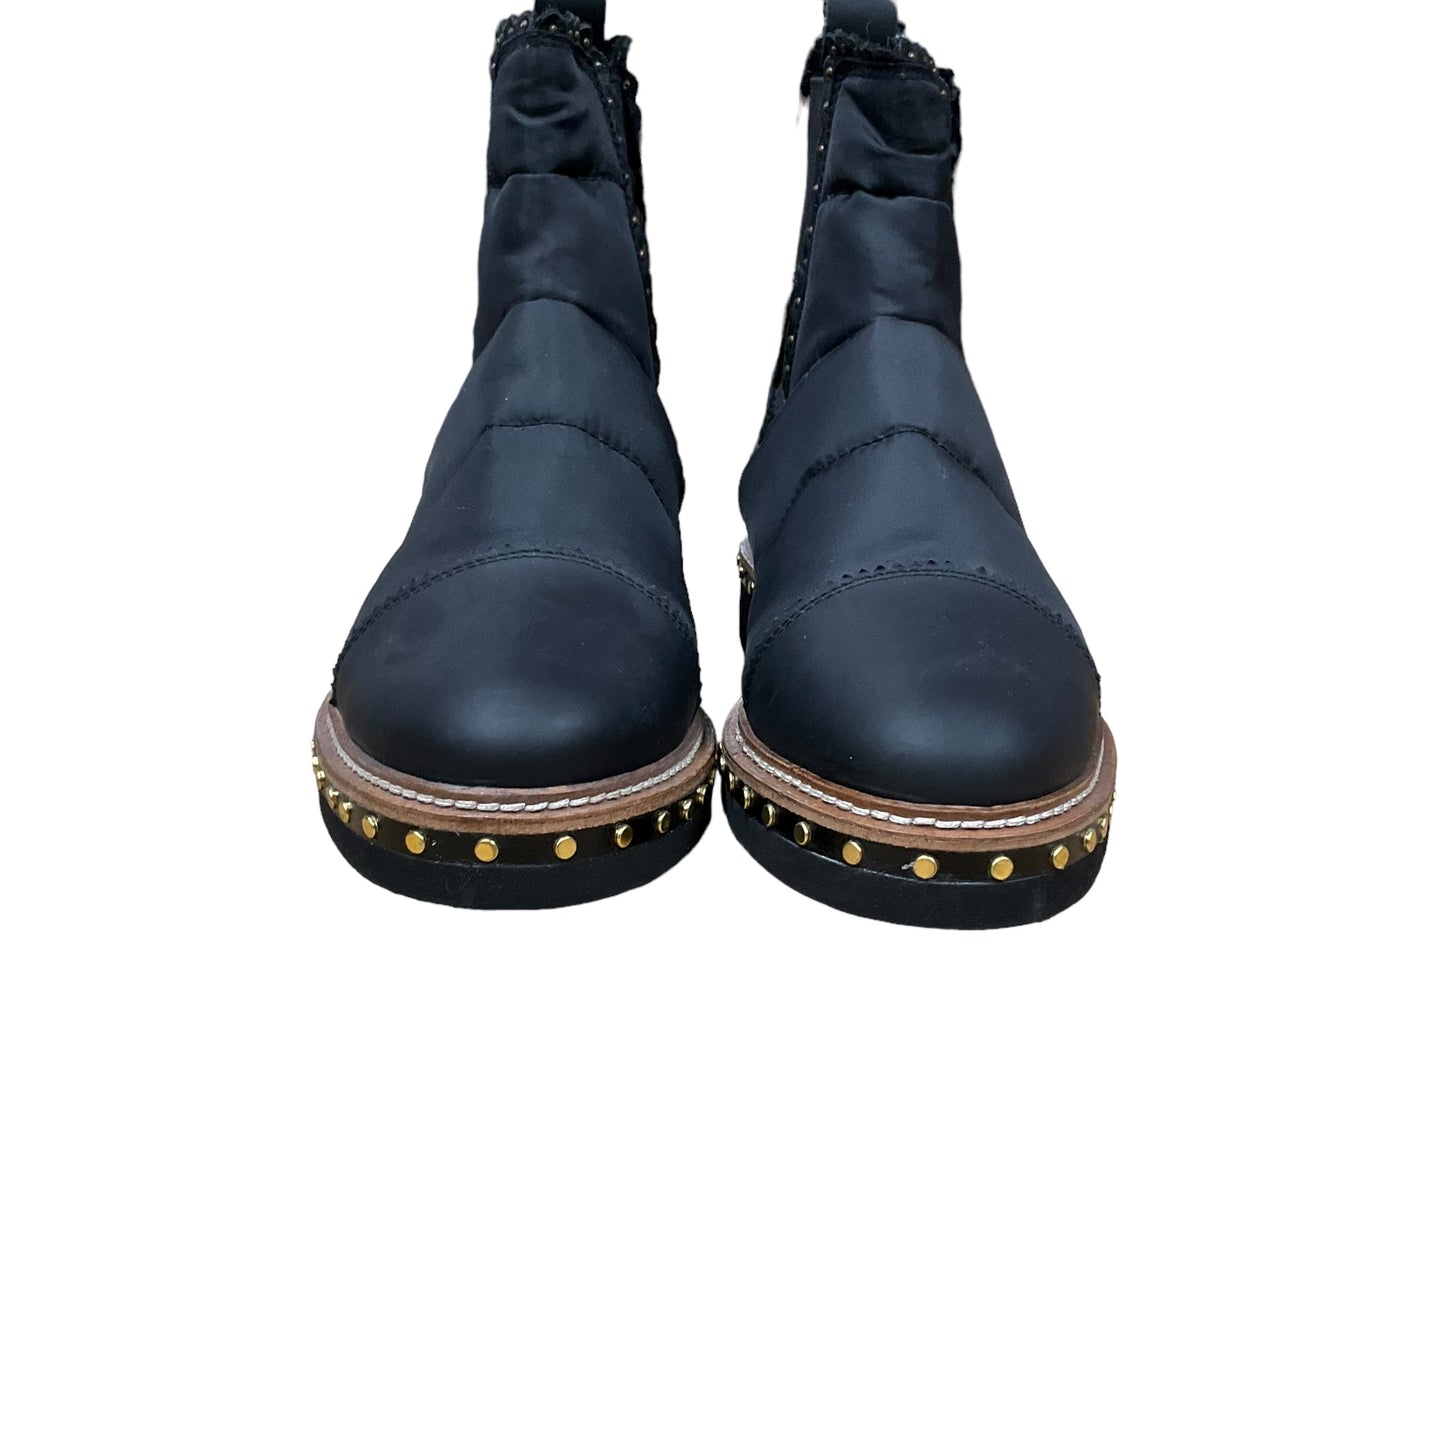 Black Boots Ankle Flats Free People, Size 8